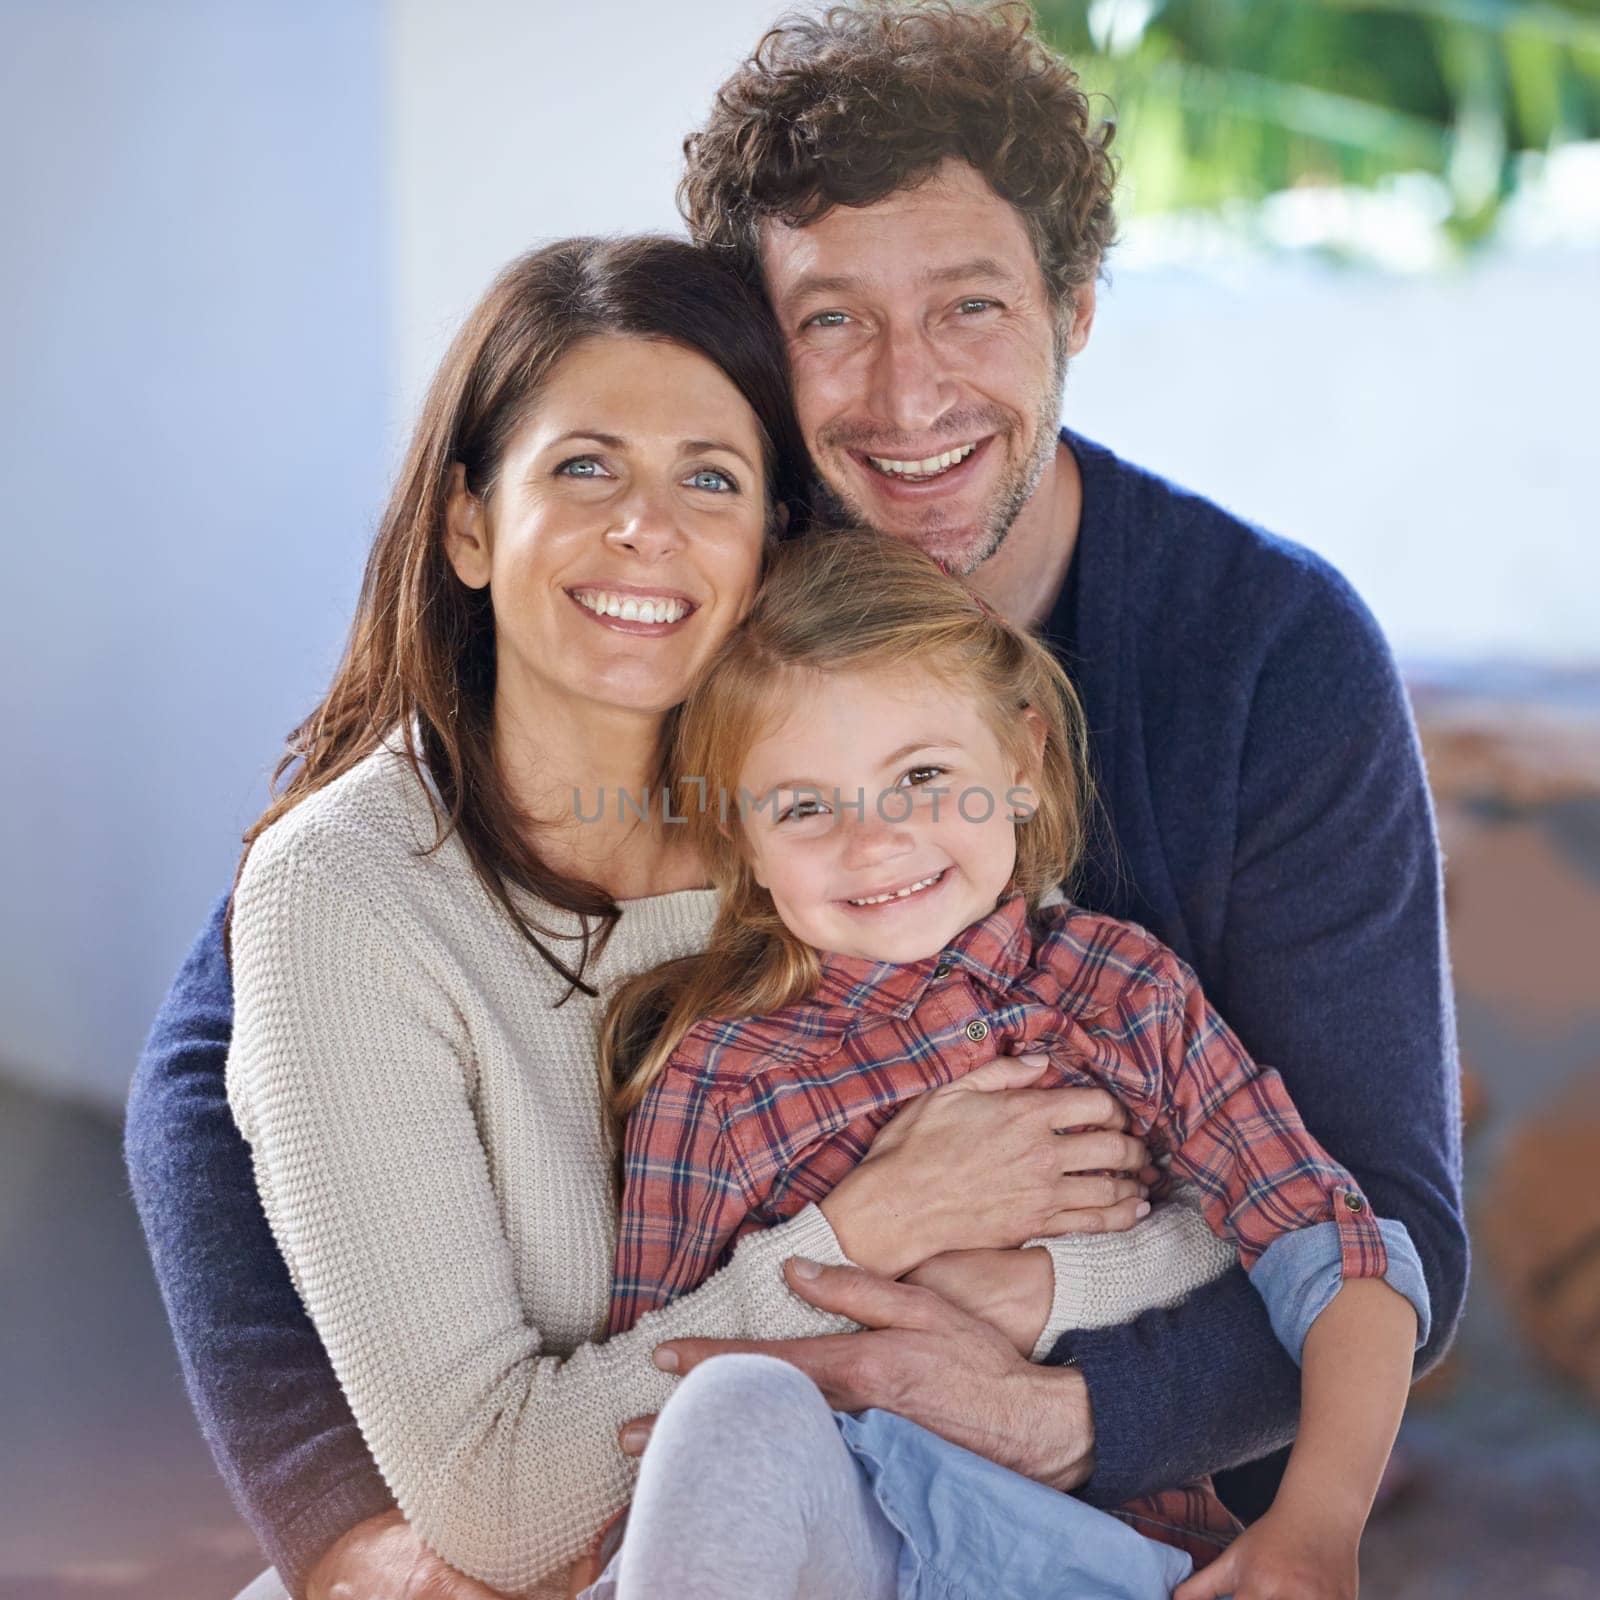 Family hug in portrait, relax in backyard with mom and dad with kid with love and care outside house. Faces of happy people with smile, woman and man with girl child together at home outdoor.